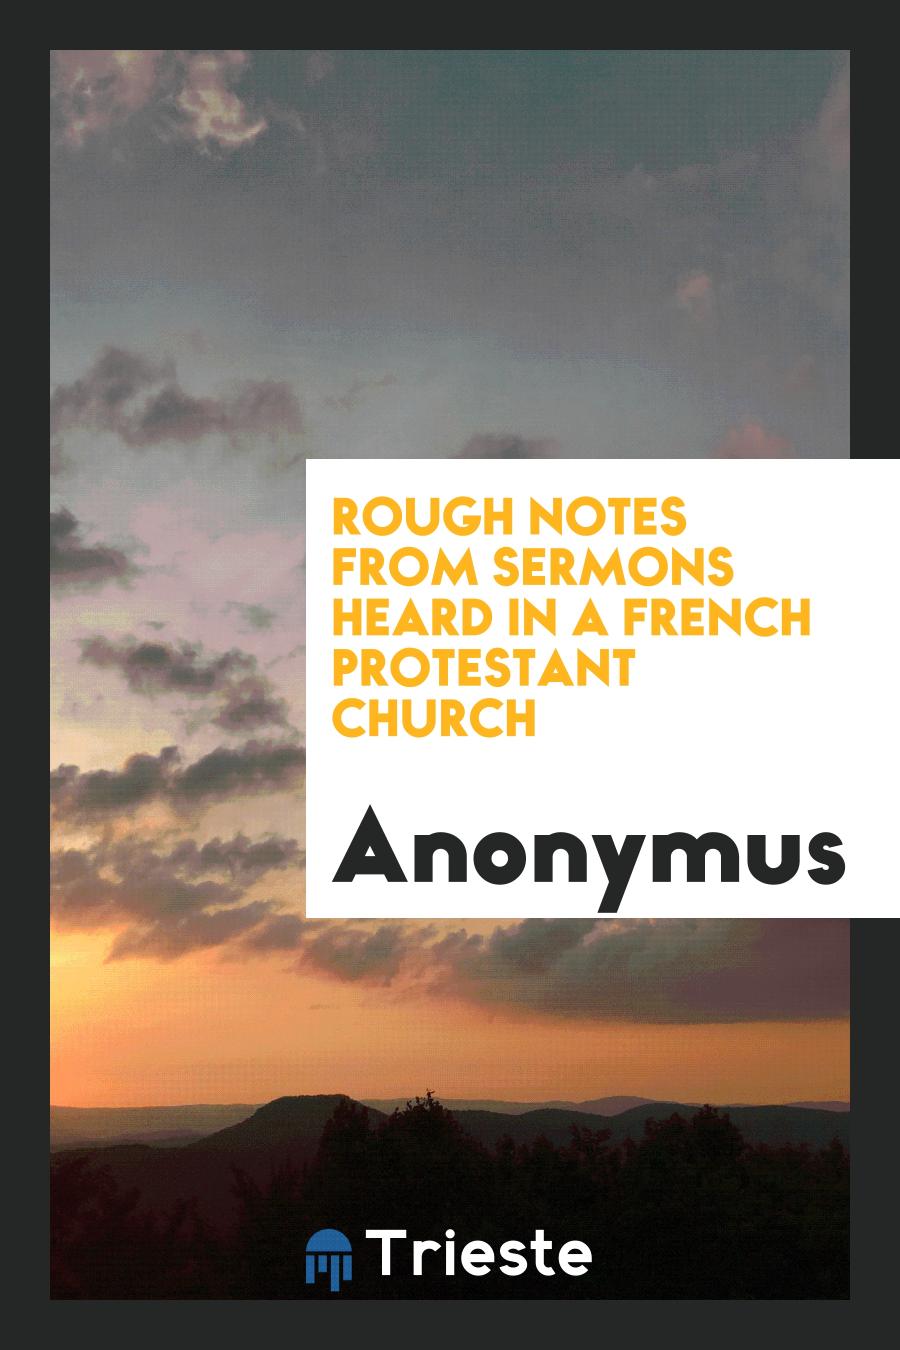 Rough notes from sermons heard in a French protestant church